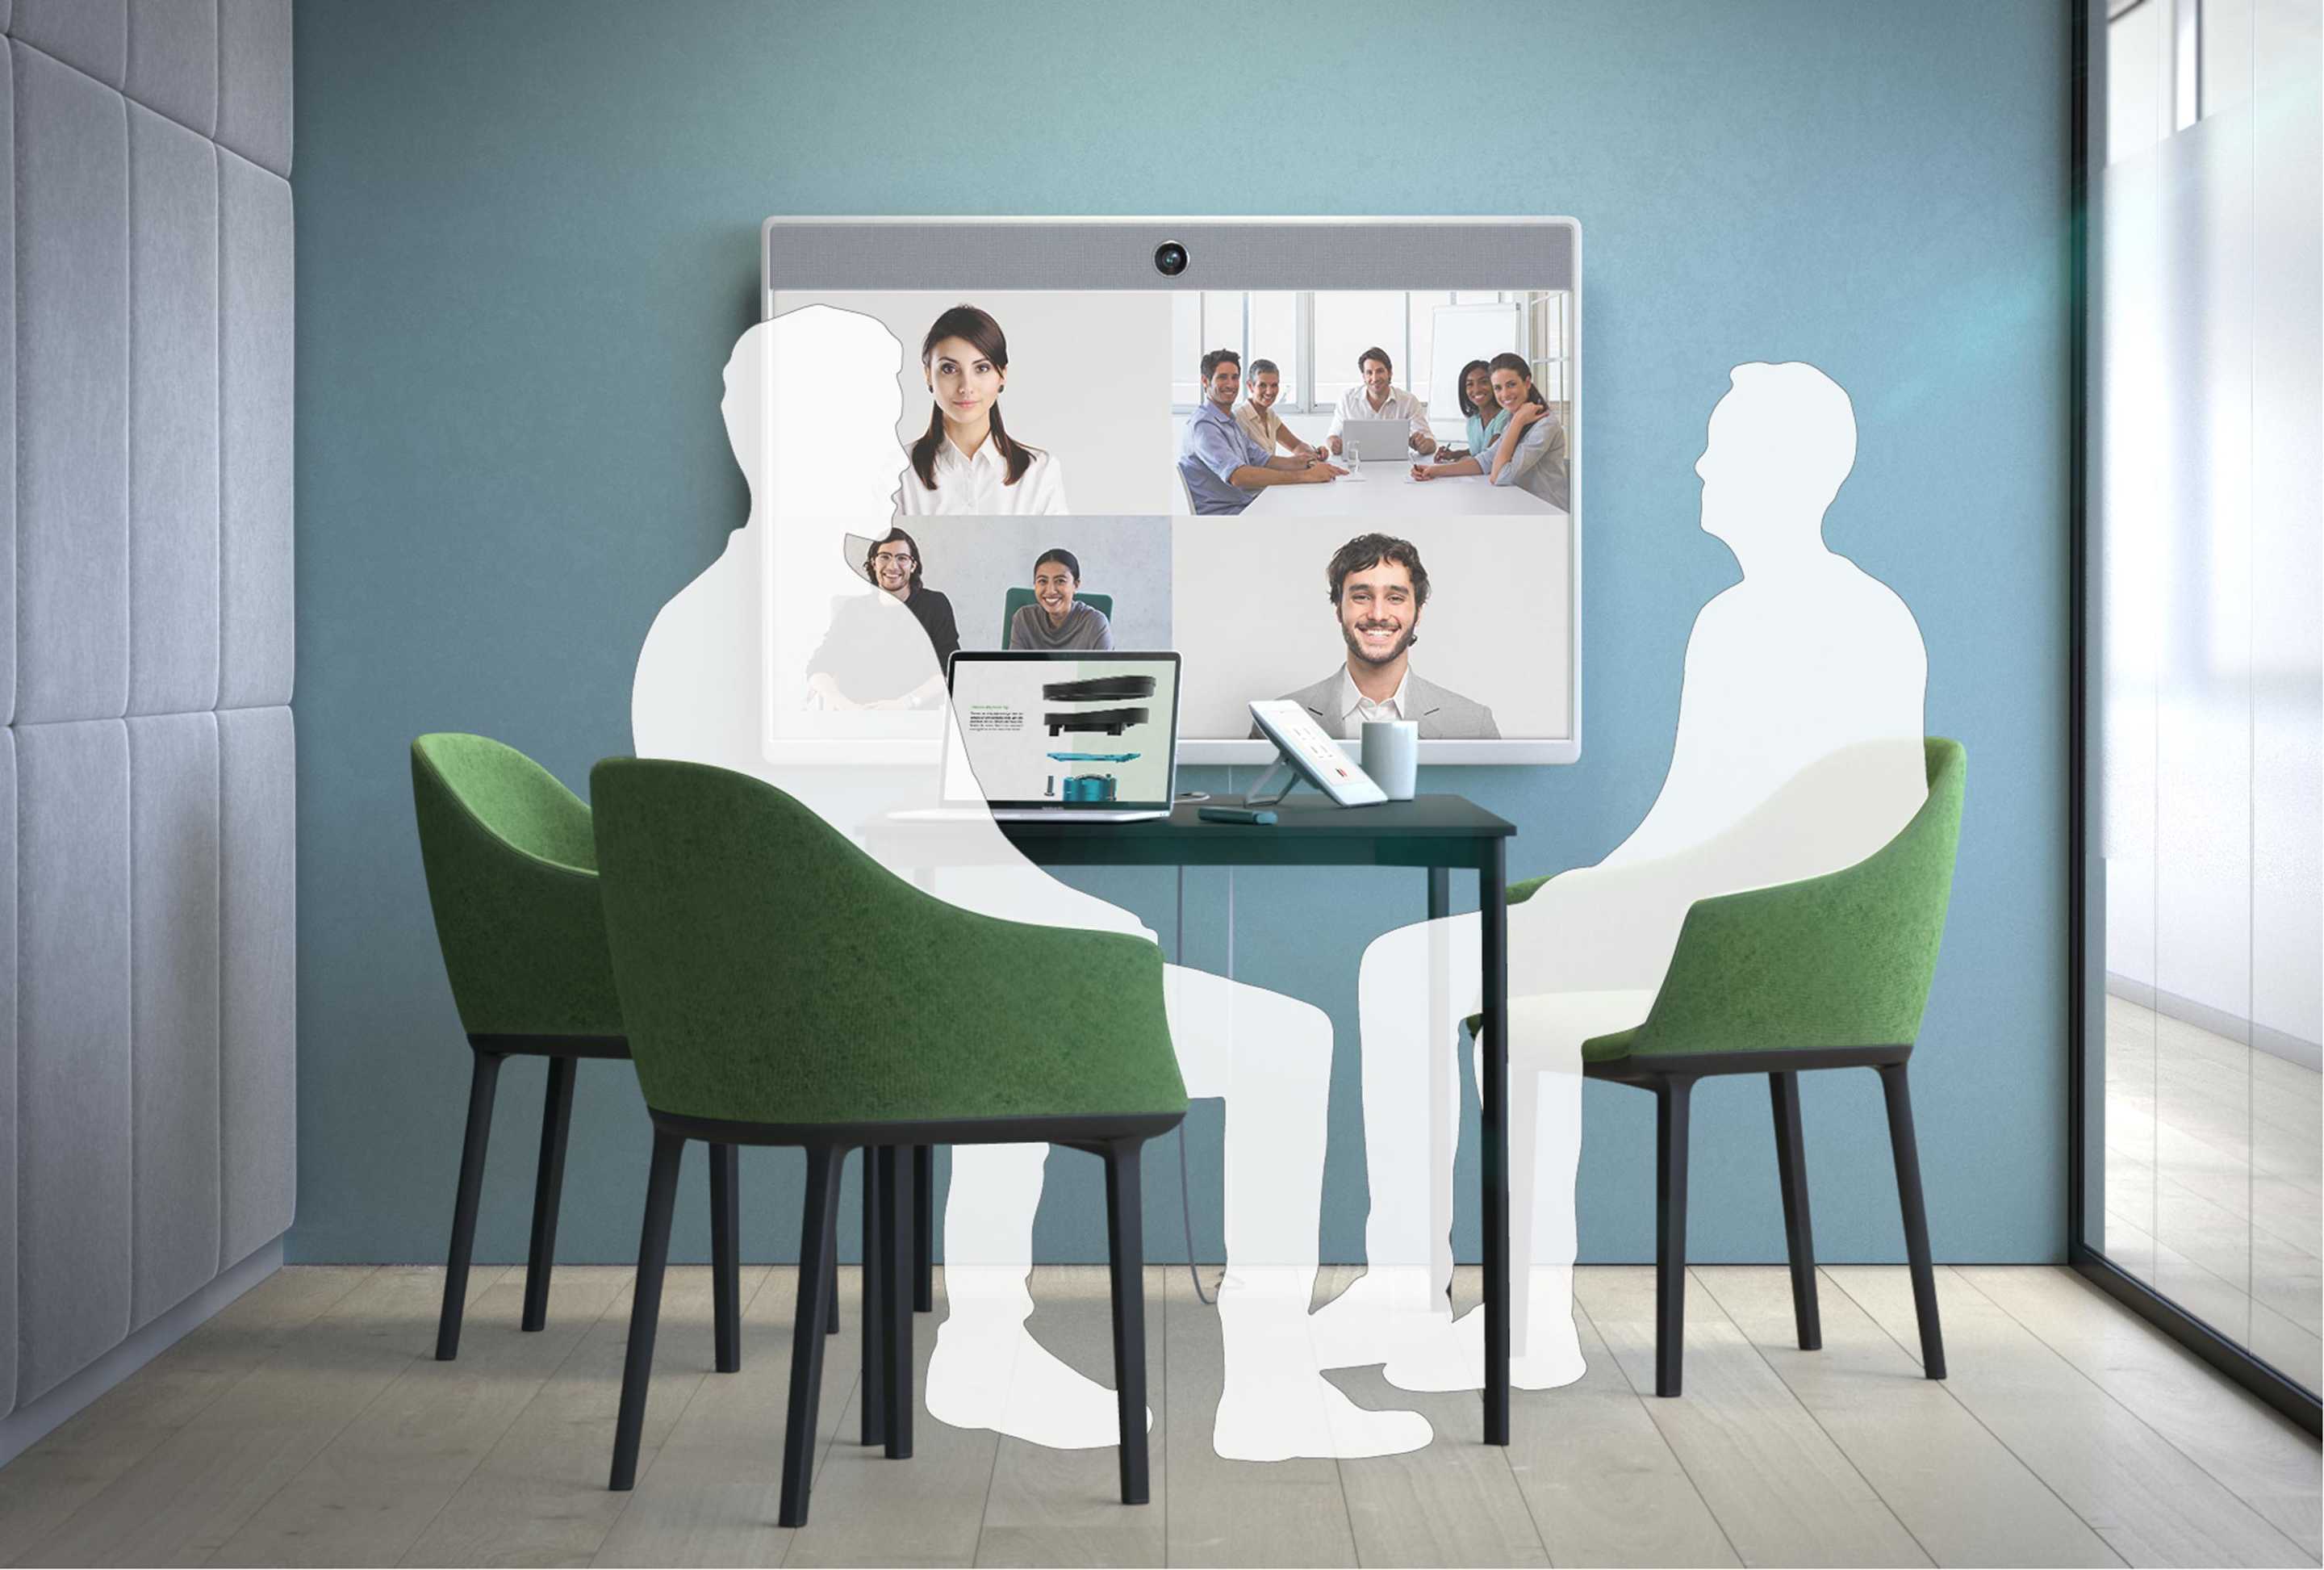 Cisco Webex Room 55 in a Video meeting within a medium sized Huddle